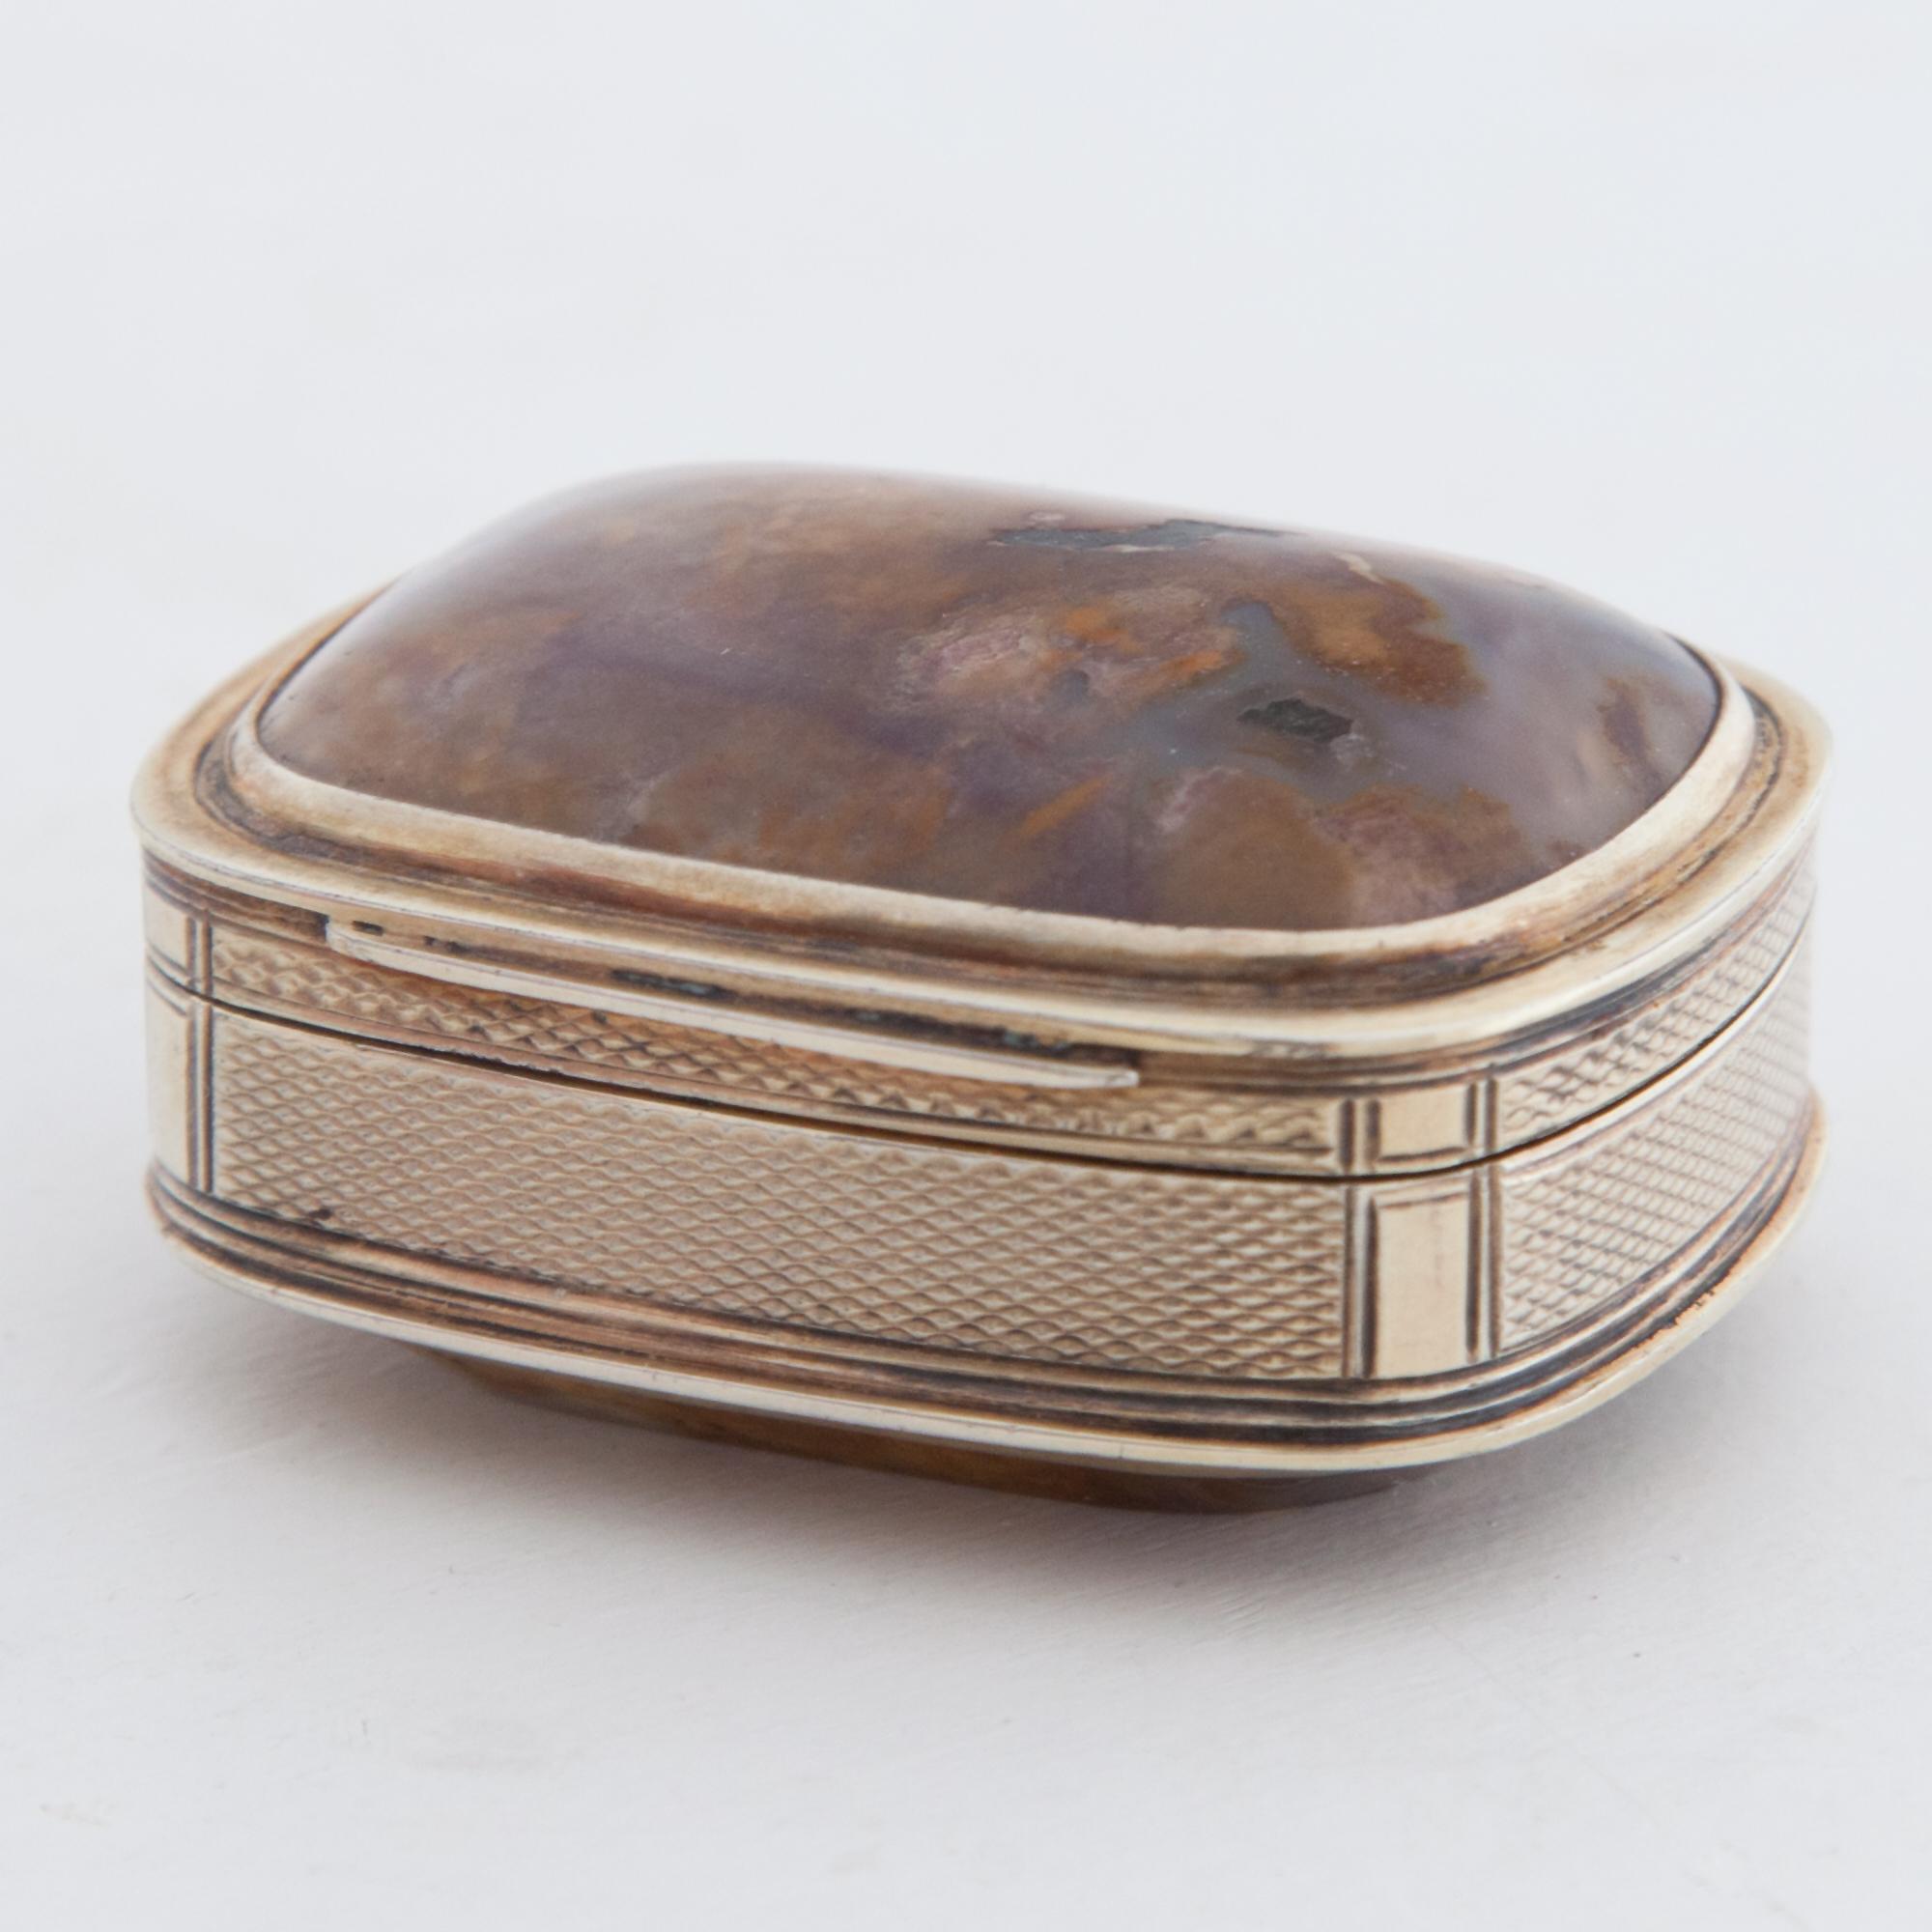 Small tabatiere with Vermeil mount and moss agate in the lid and bottom. Inscription at the inner rim: 